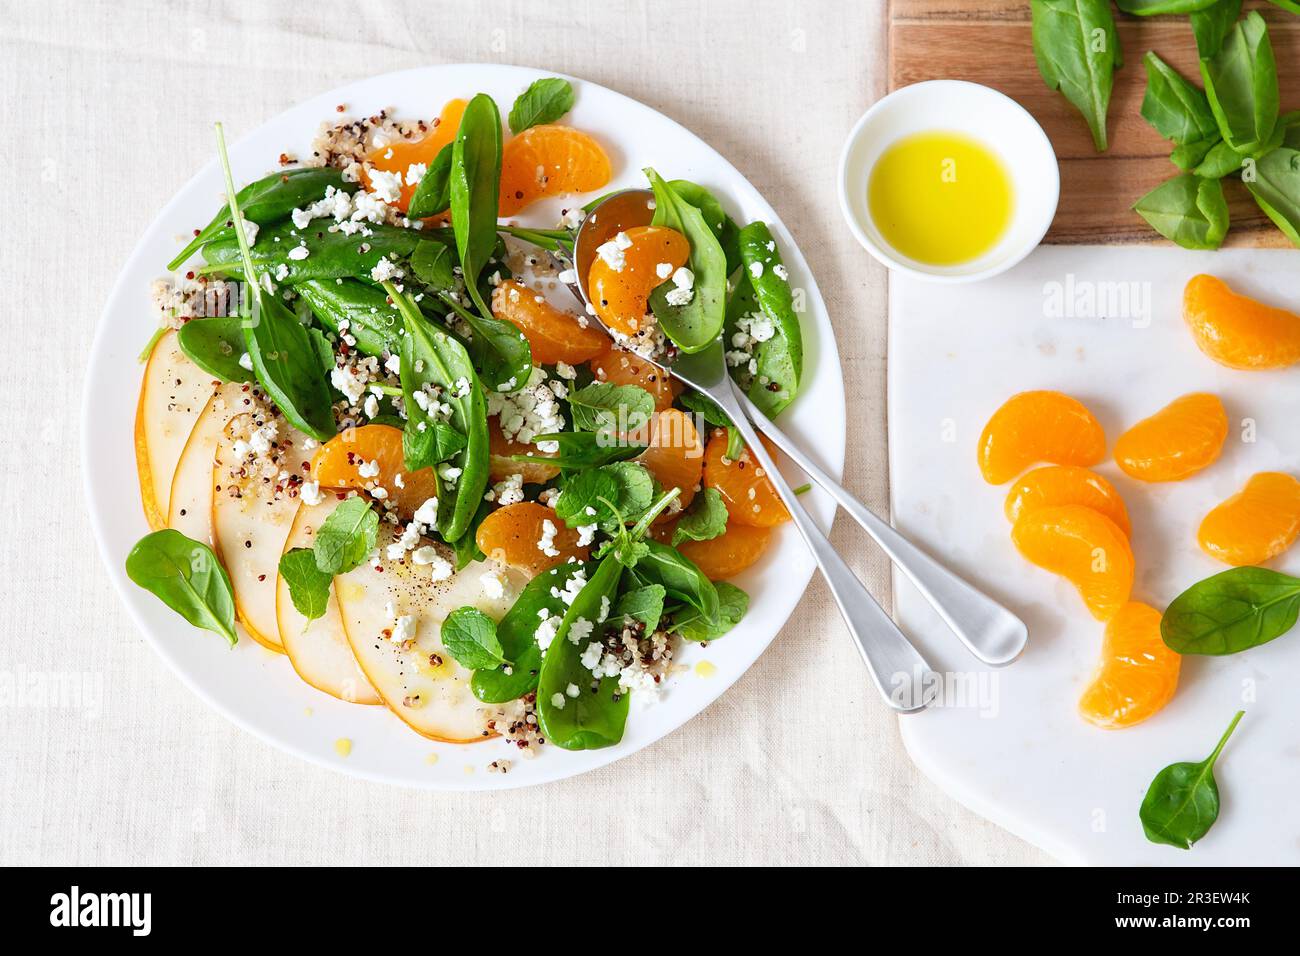 Spinach and quinoa salad with pears, oranges and ricotta. Healthy Meal prep. Plant-based dishes. Green living. Vegan recipe. Foo Stock Photo